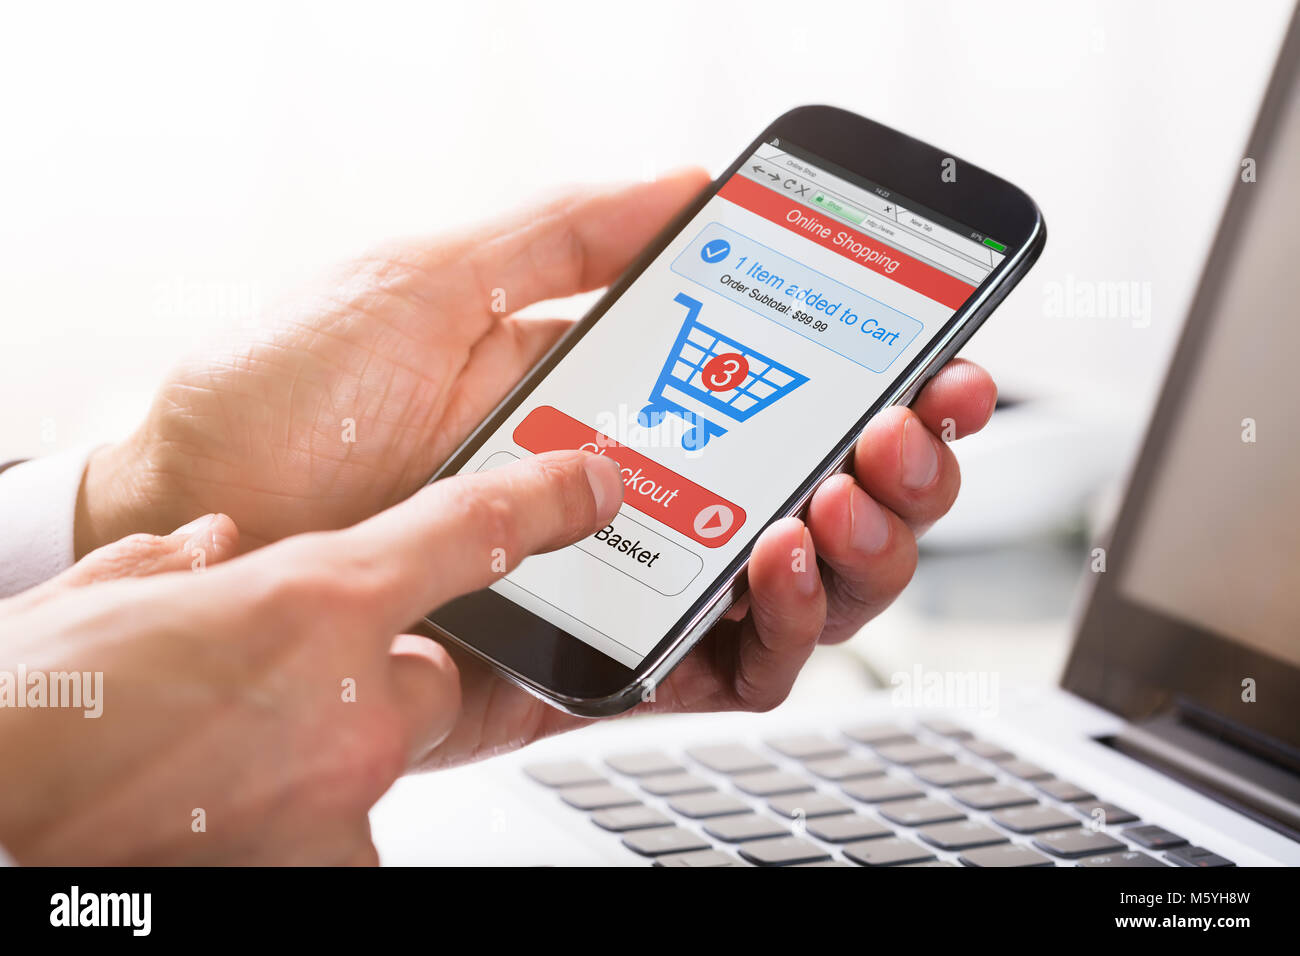 Close-up Of A Businessperson's Hand Clicking On Checkout Option While Shopping On Mobile Phone Stock Photo